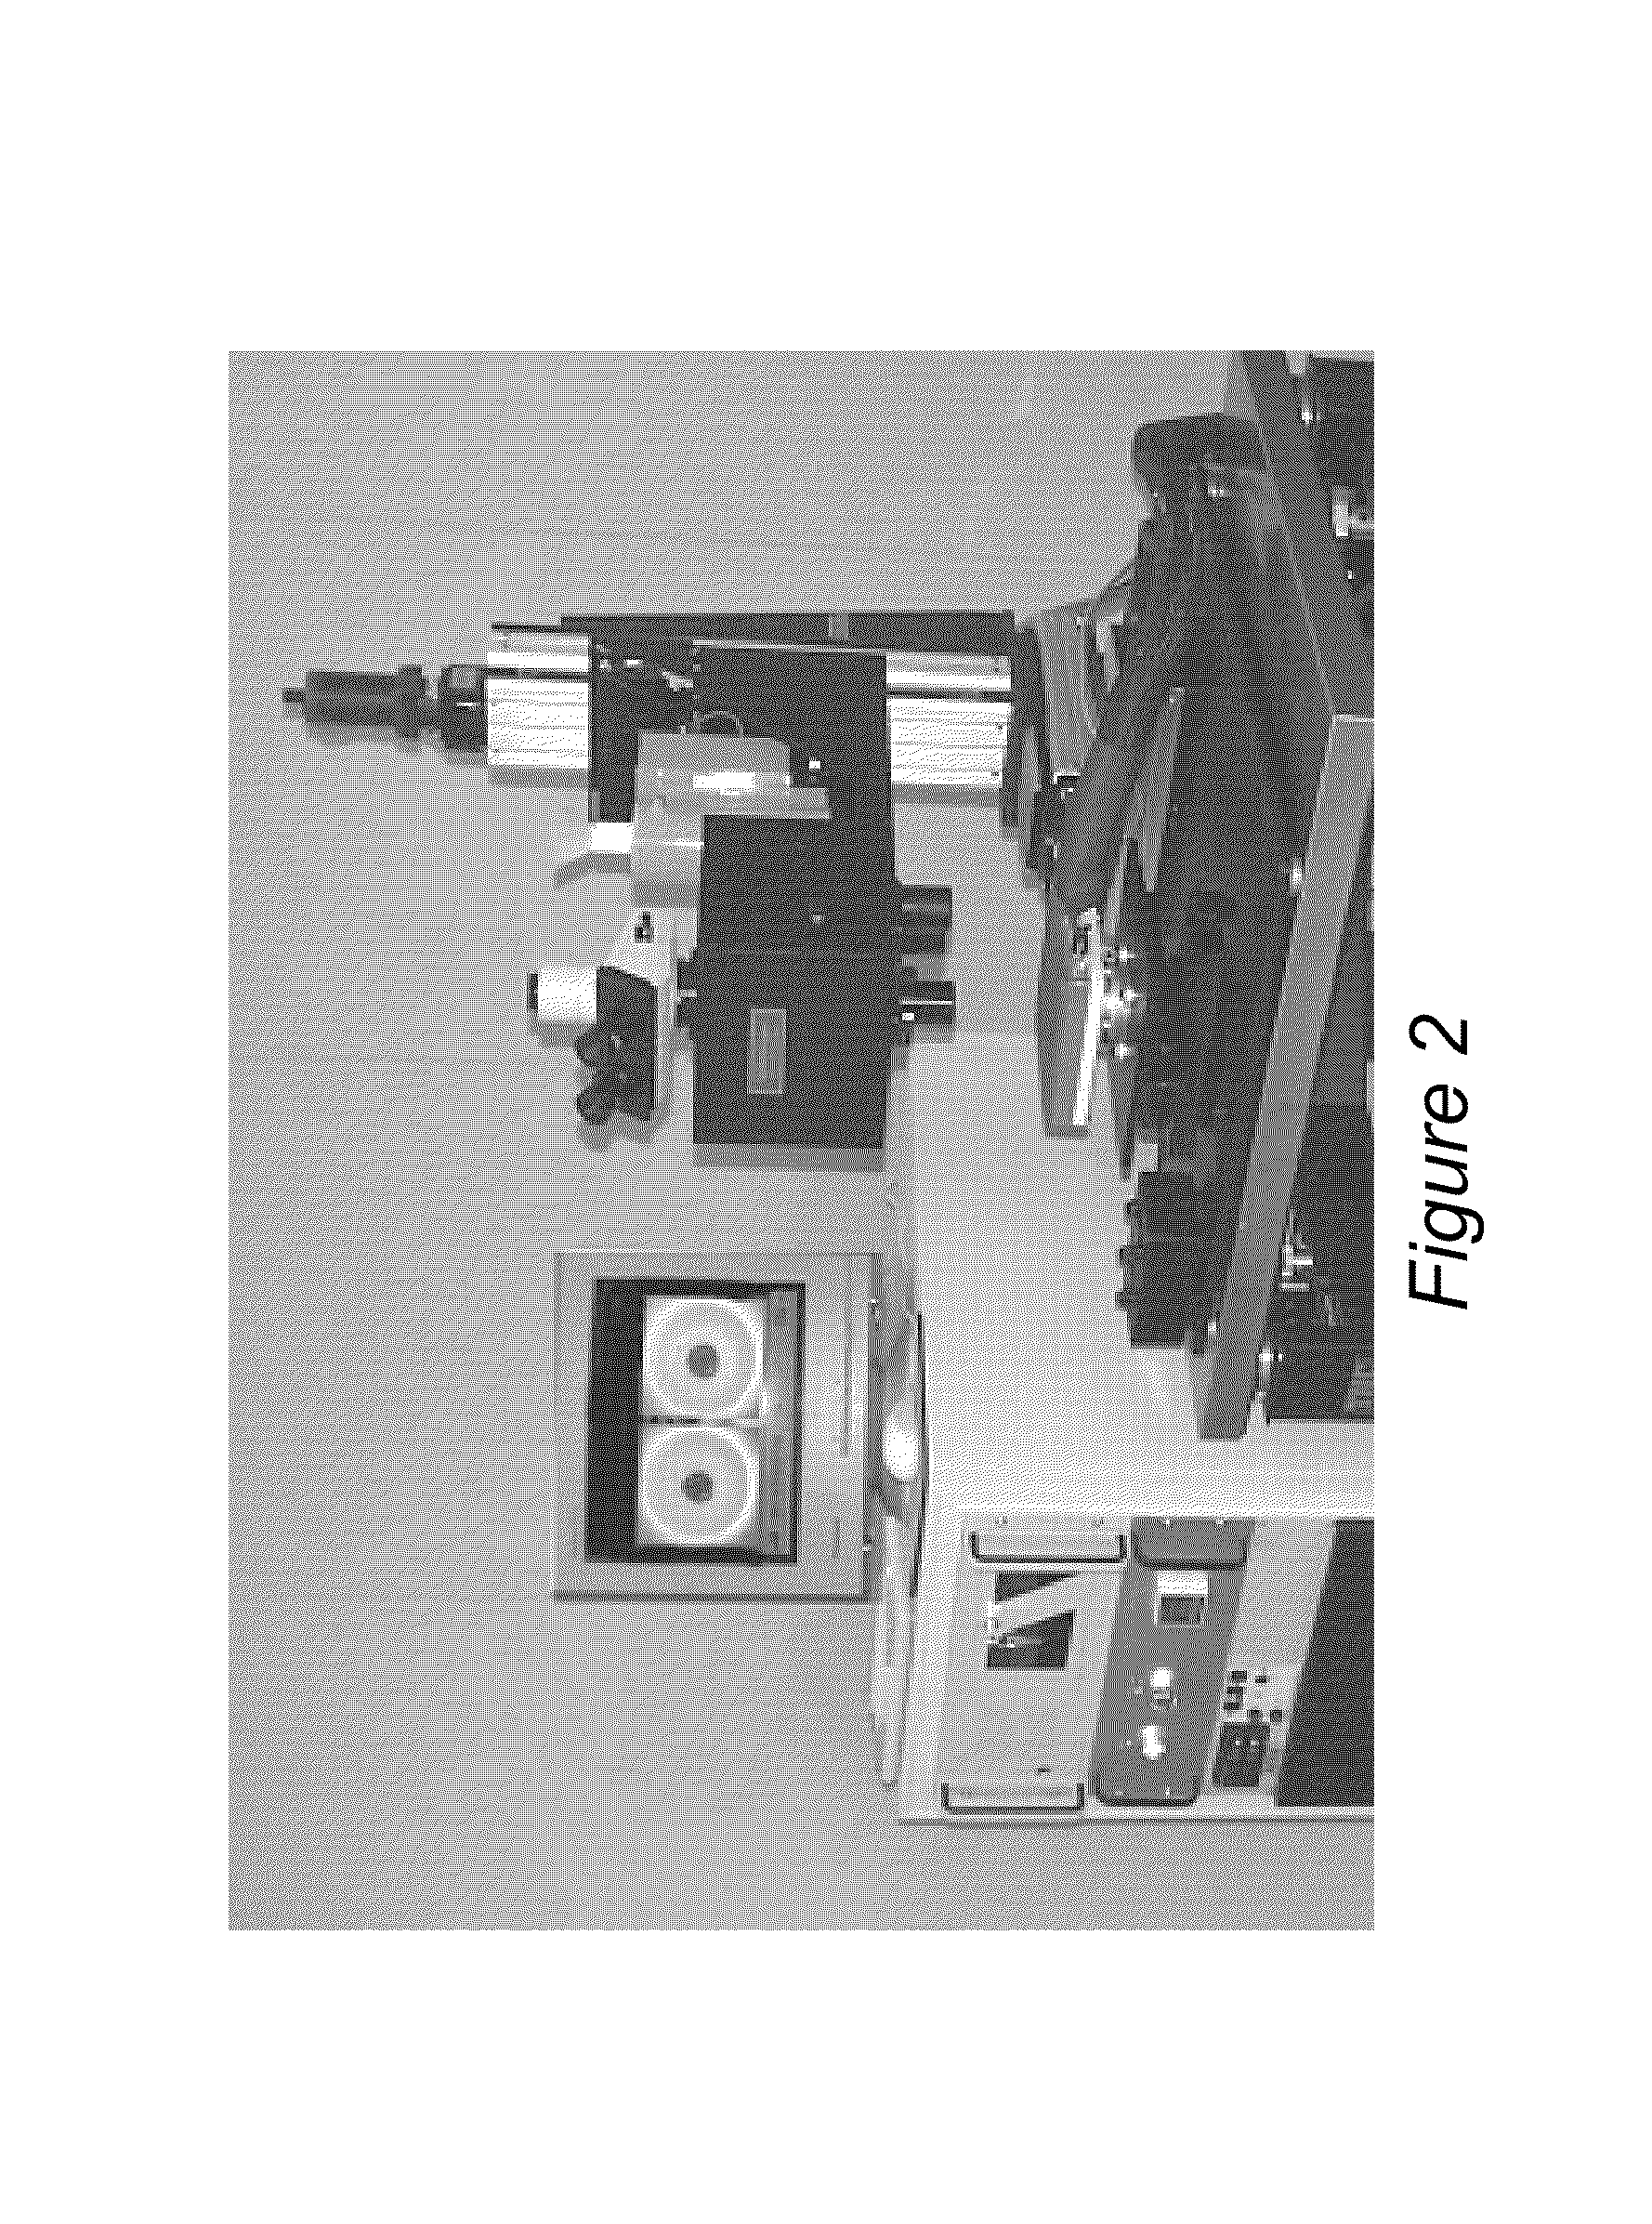 Method and apparatus for alignment, comparison and identification of characteristic tool marks, including ballistic signatures